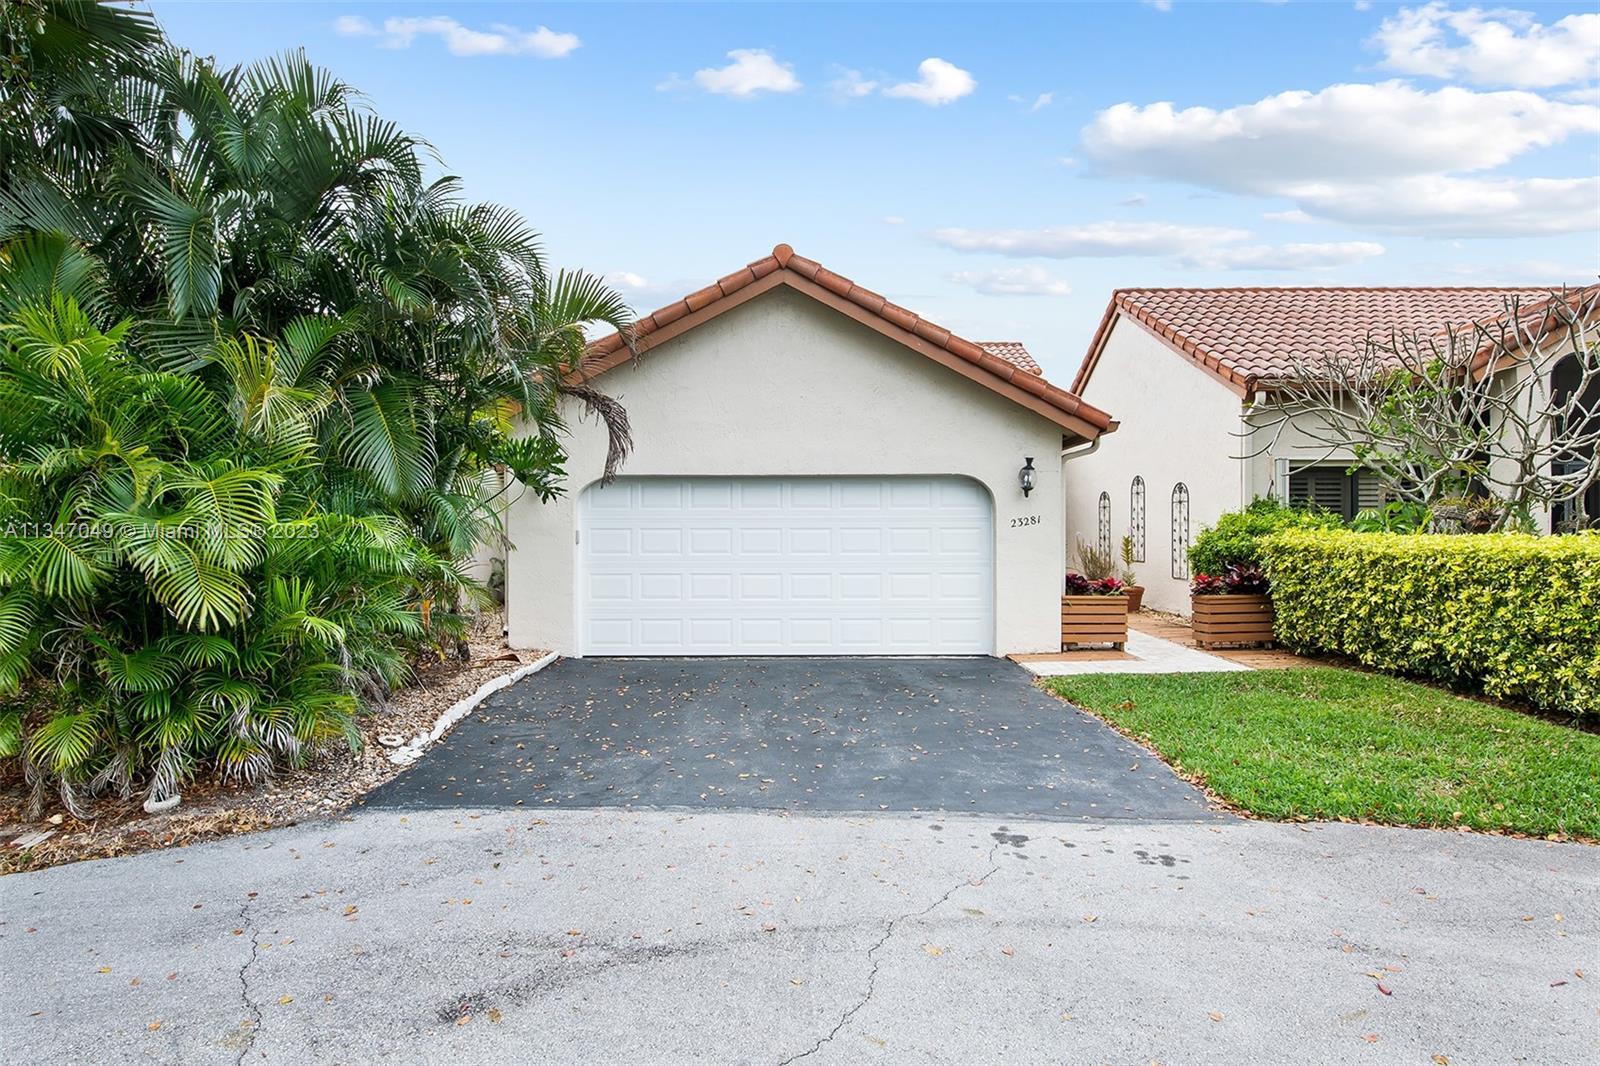 Single story 3BD, 2BA + office located in Waterside! Minutes to Town Center Mall, Mizner Park, and t